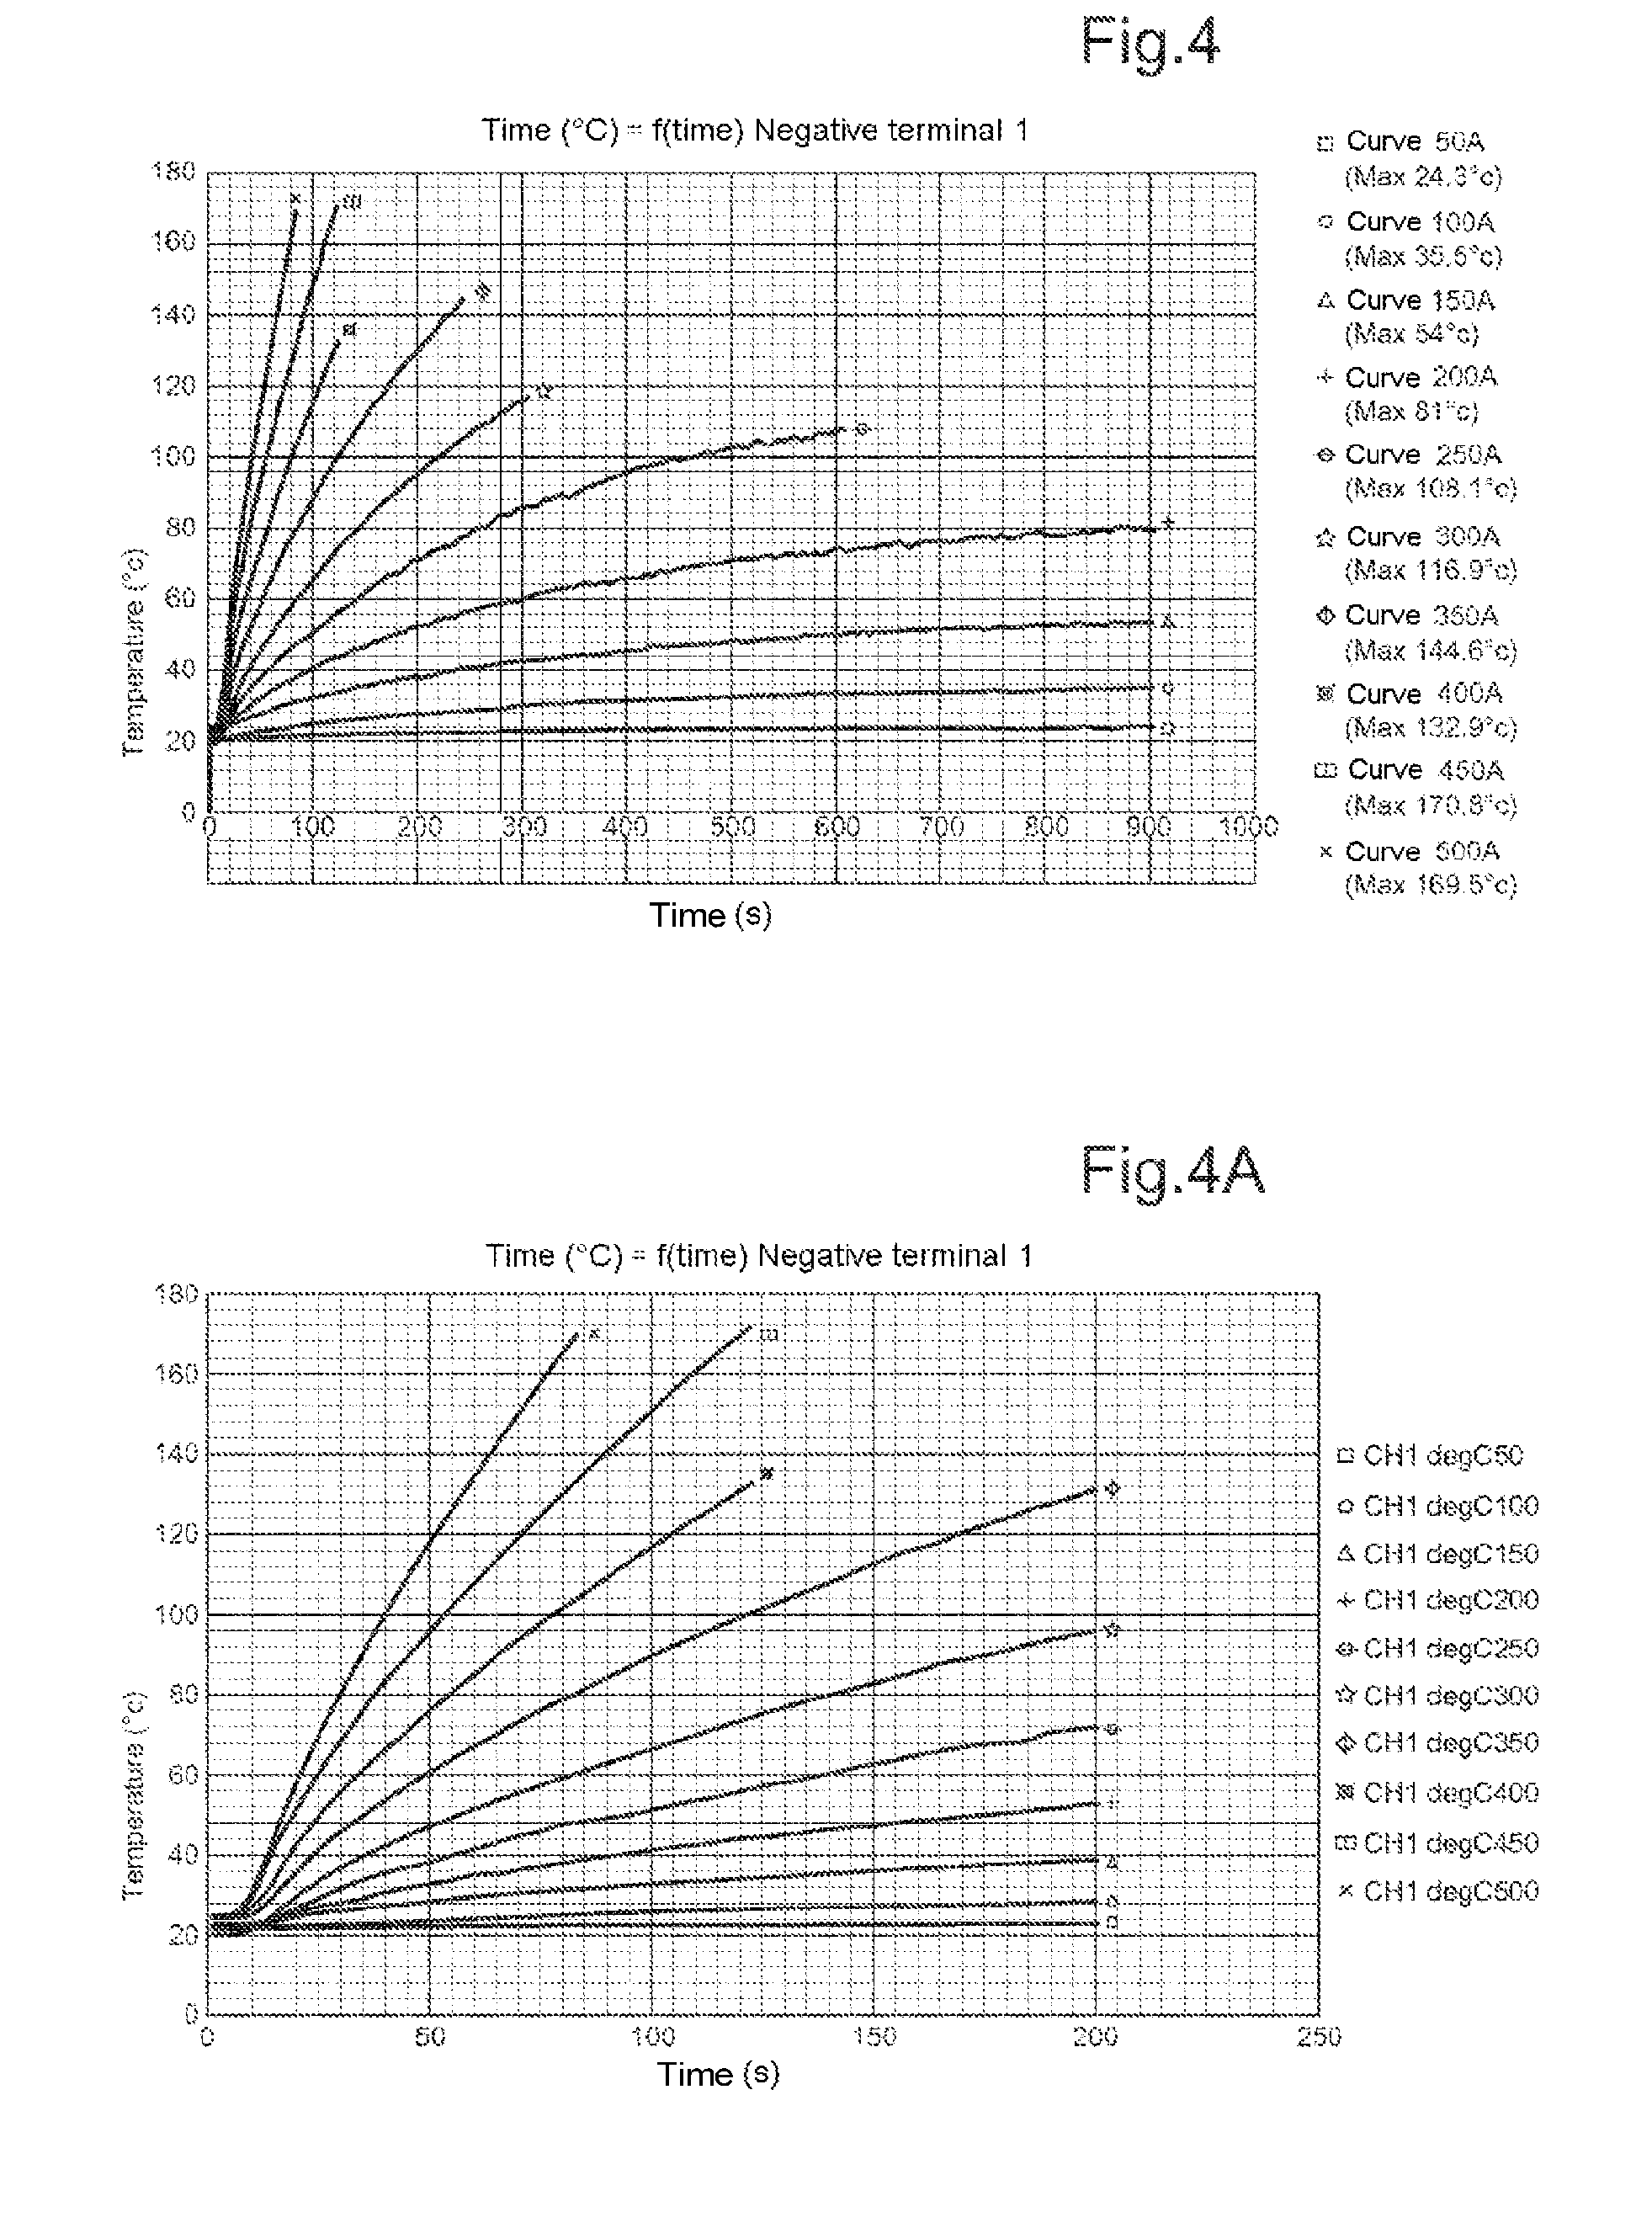 Bushing Forming a Terminal for a Lithium Storage Battery and Related Storage Battery